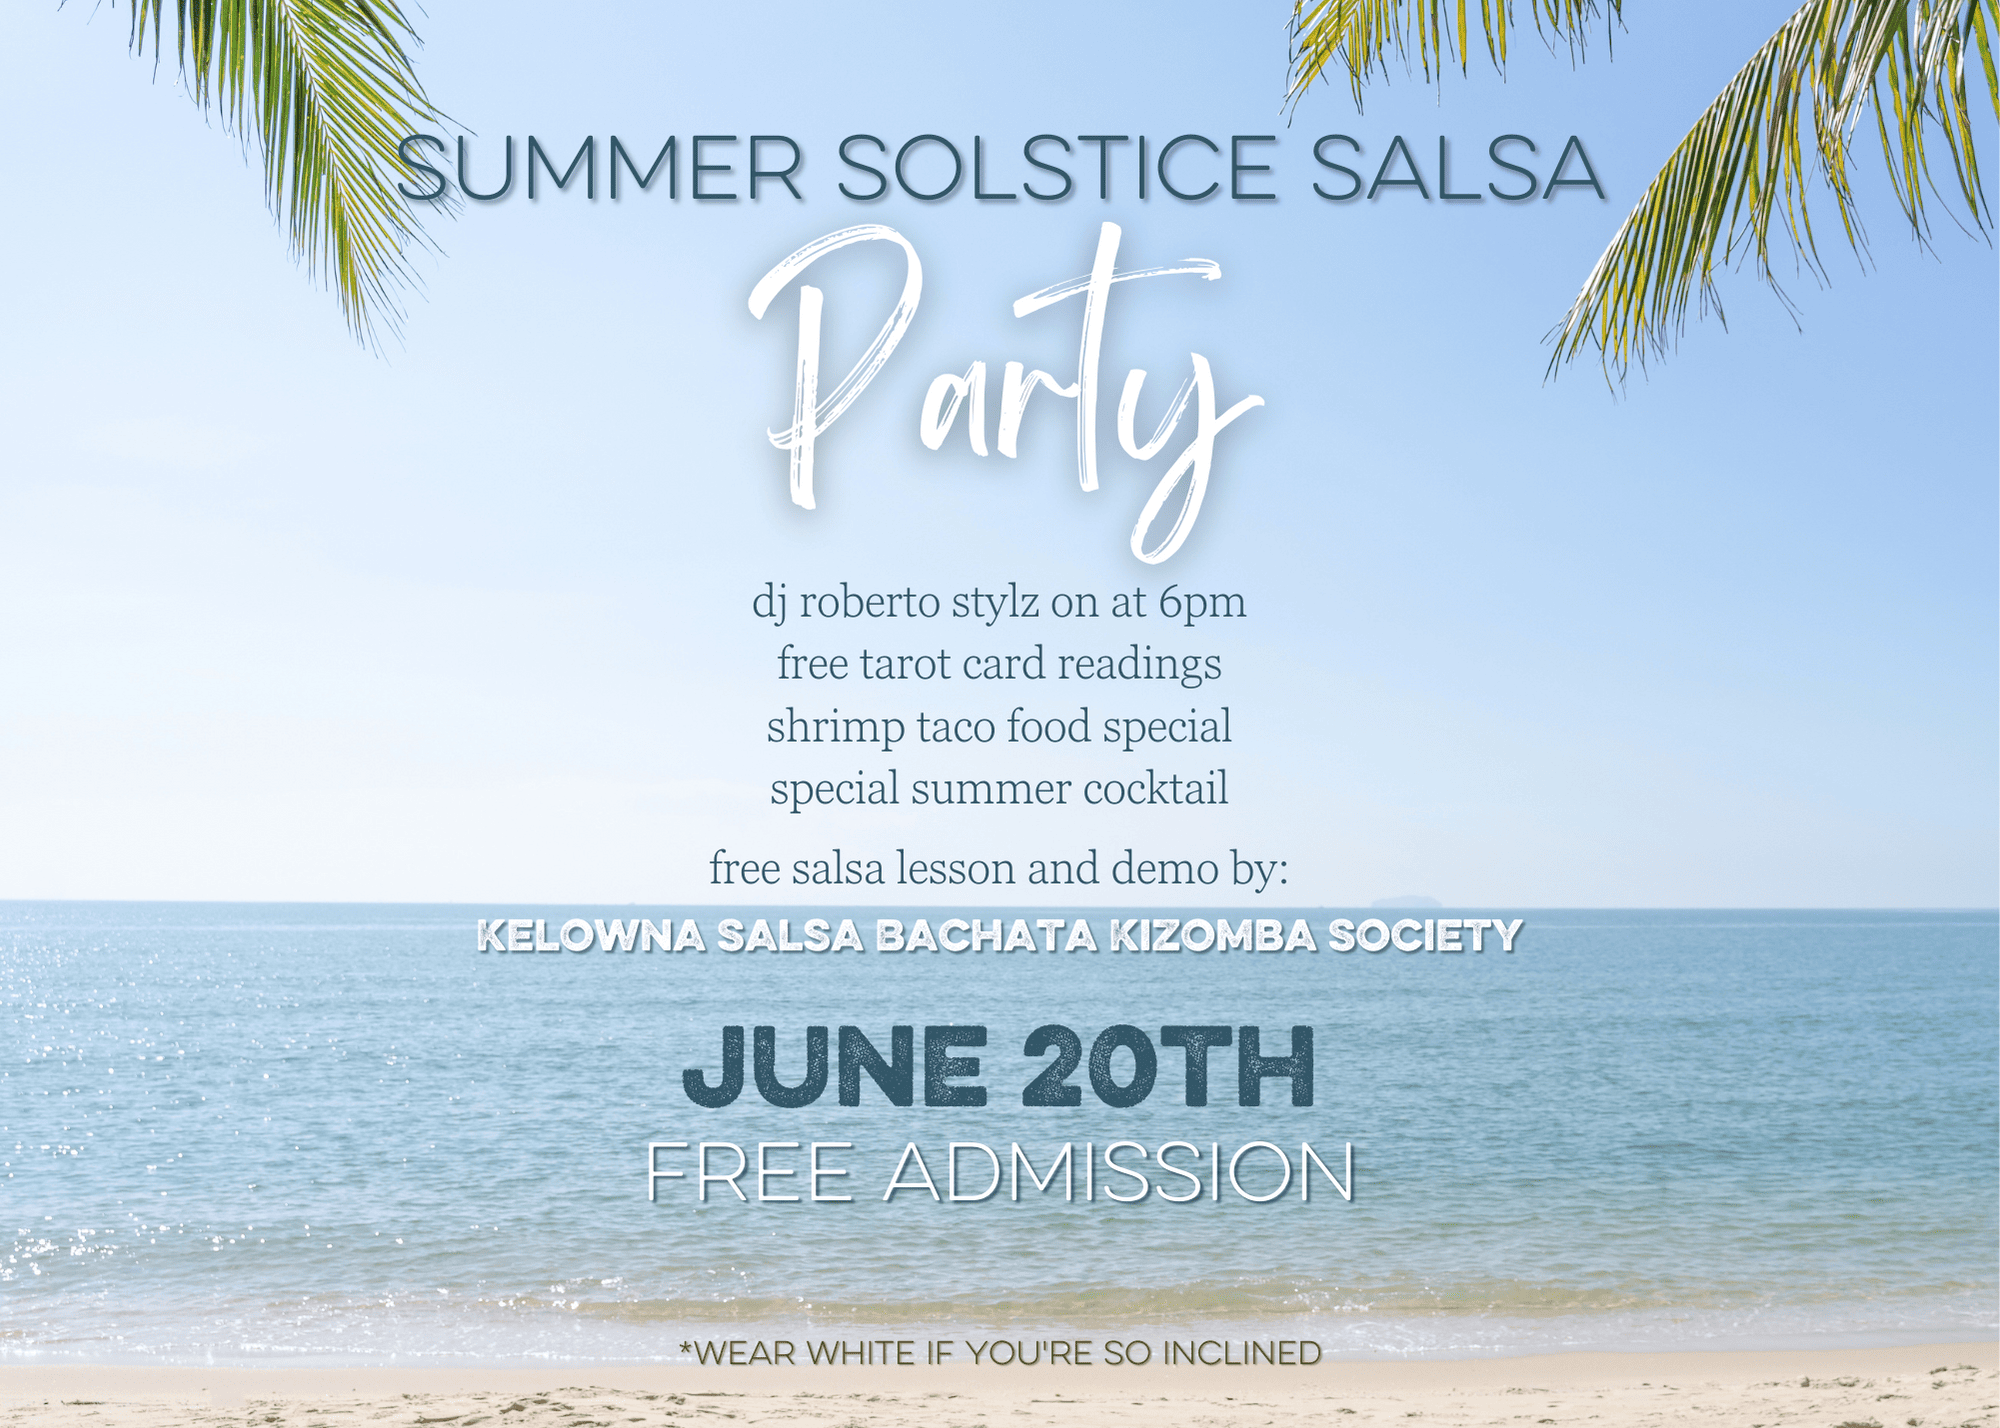 Summer Solstice Salsa Party at Red Bird Brewing